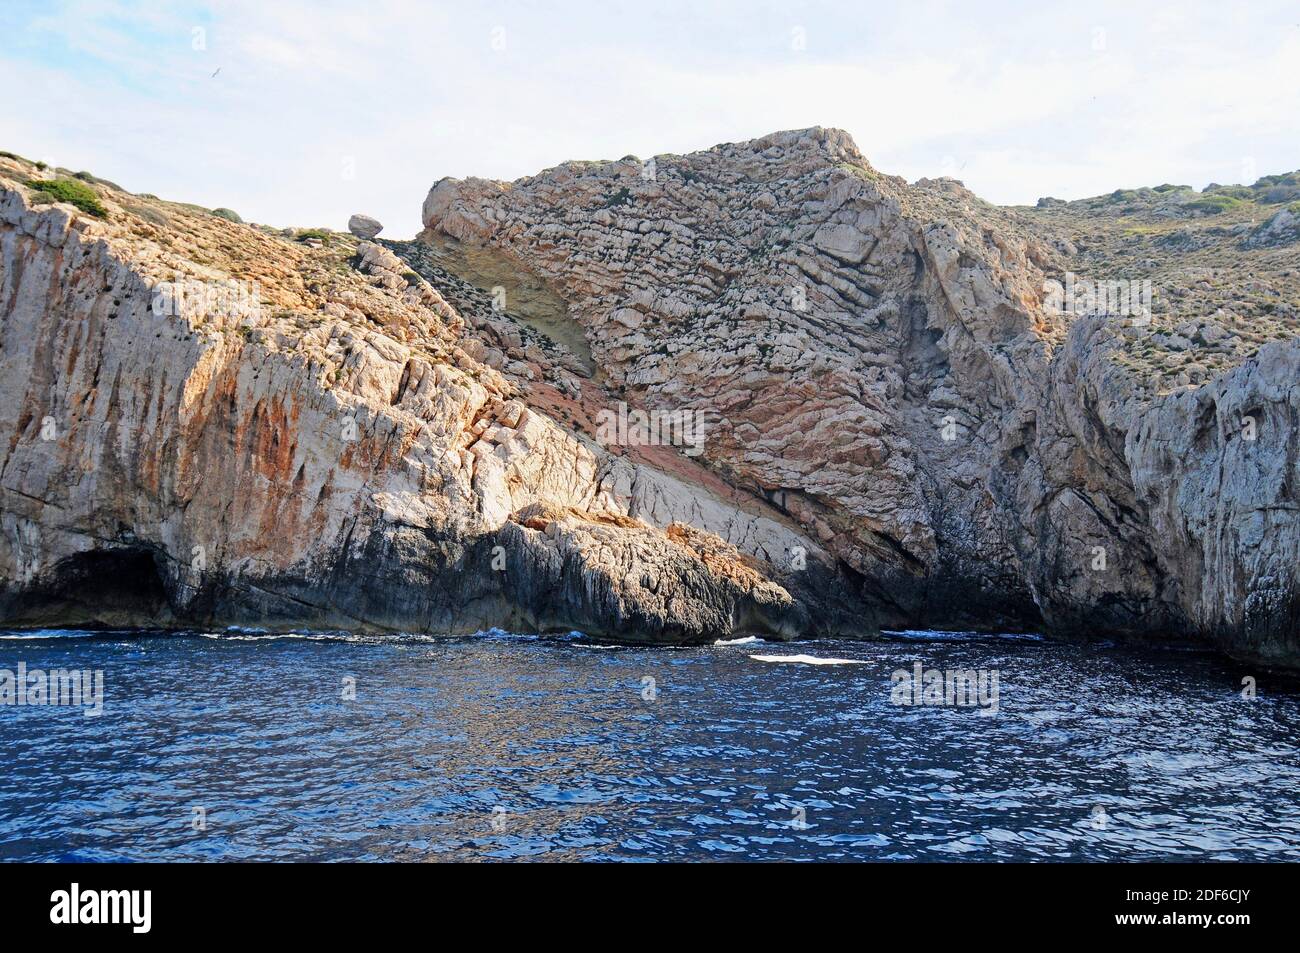 Reverse or thrust fault in limestone. Cabrera National Park, Balearic Islands, Spain. Stock Photo